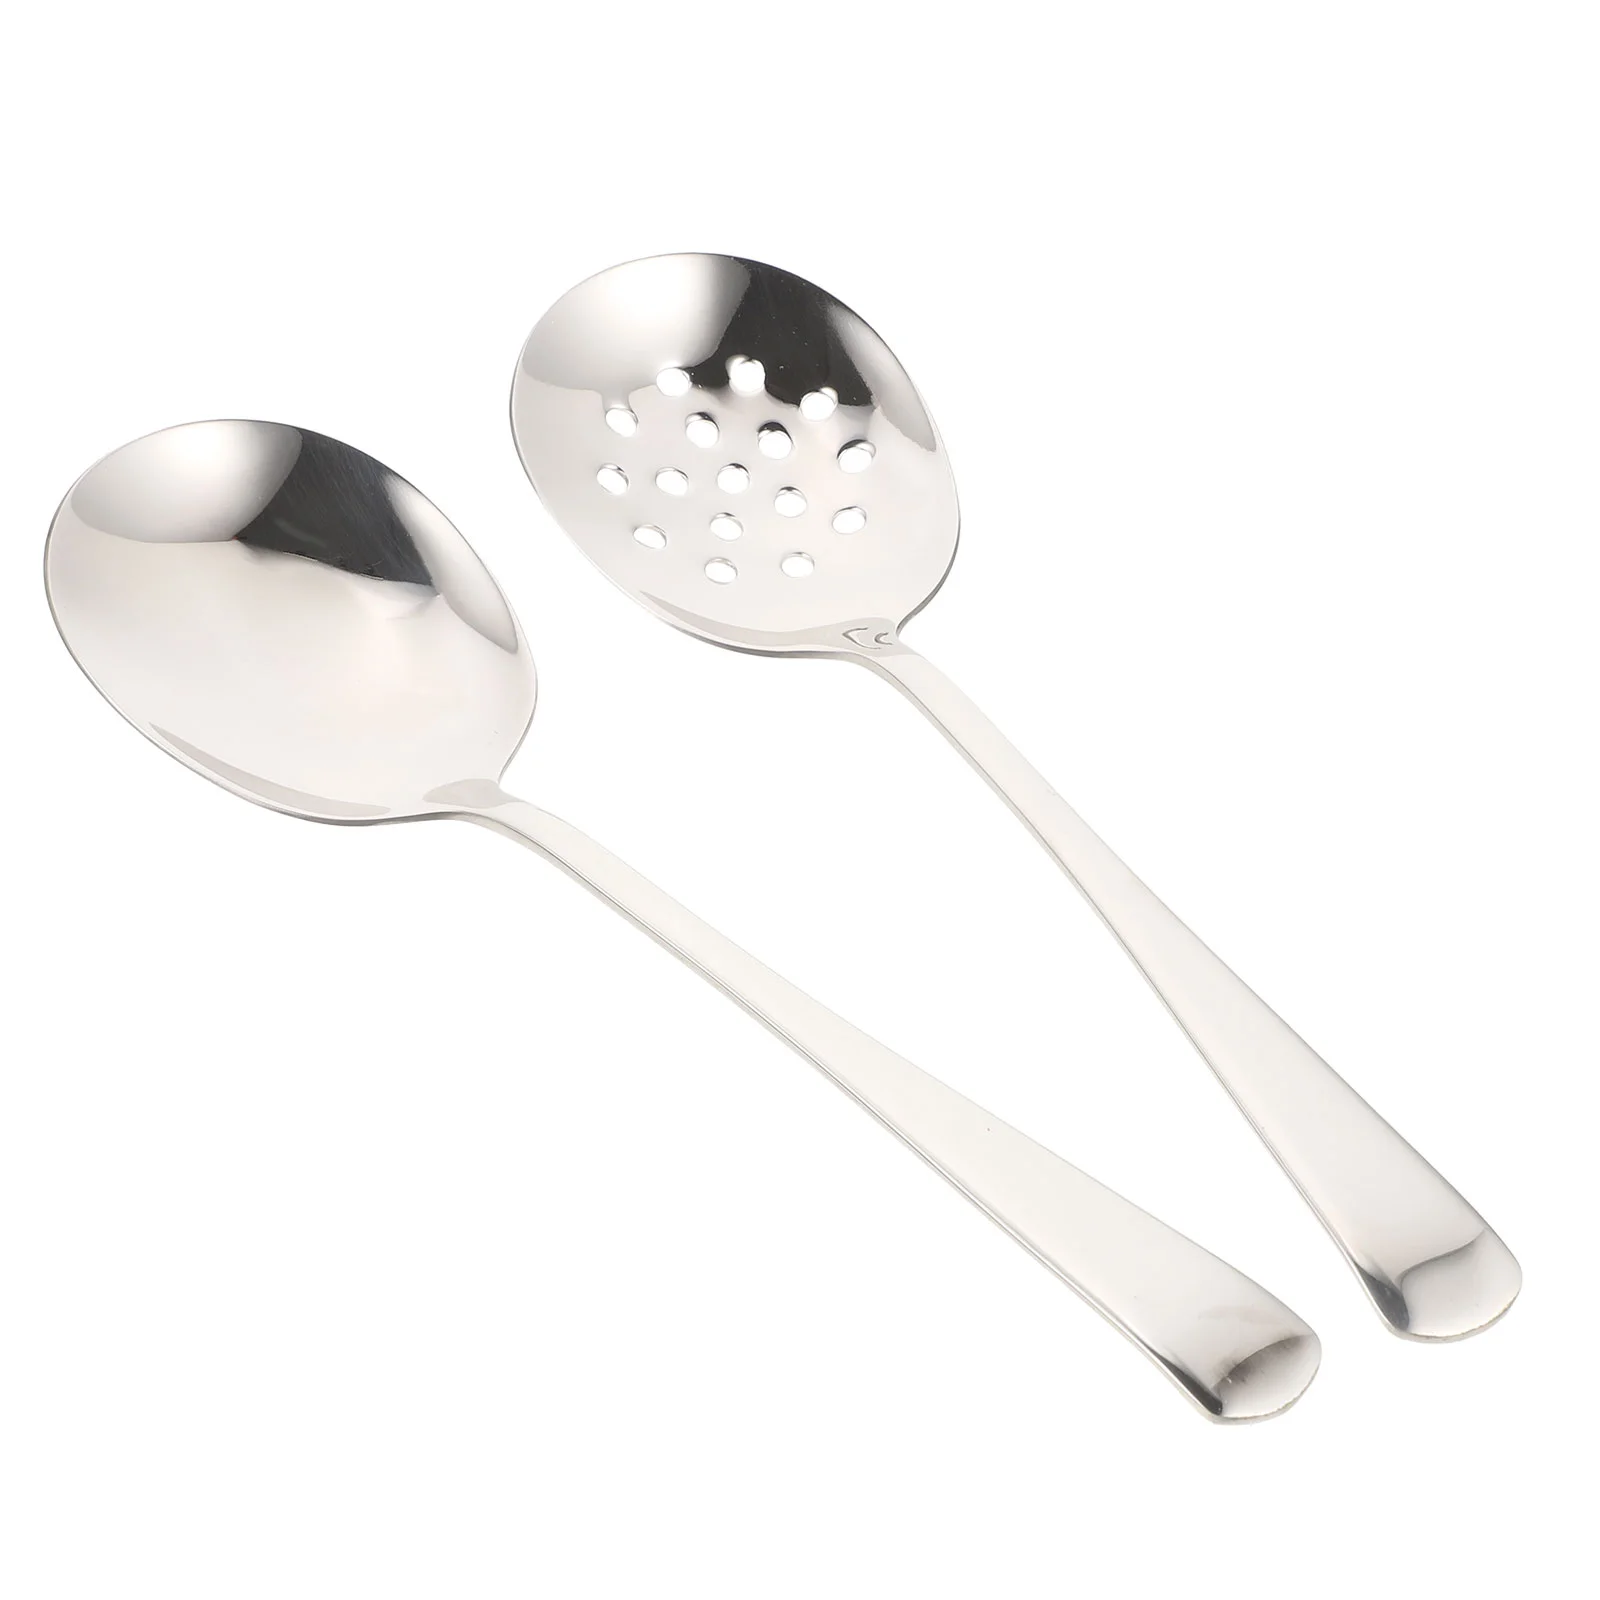 

Spoon Serving Spoons Buffet Slotted Soup Utensils Caviar Perforated Straining Large Metal Banquet Steel Stainless Parties